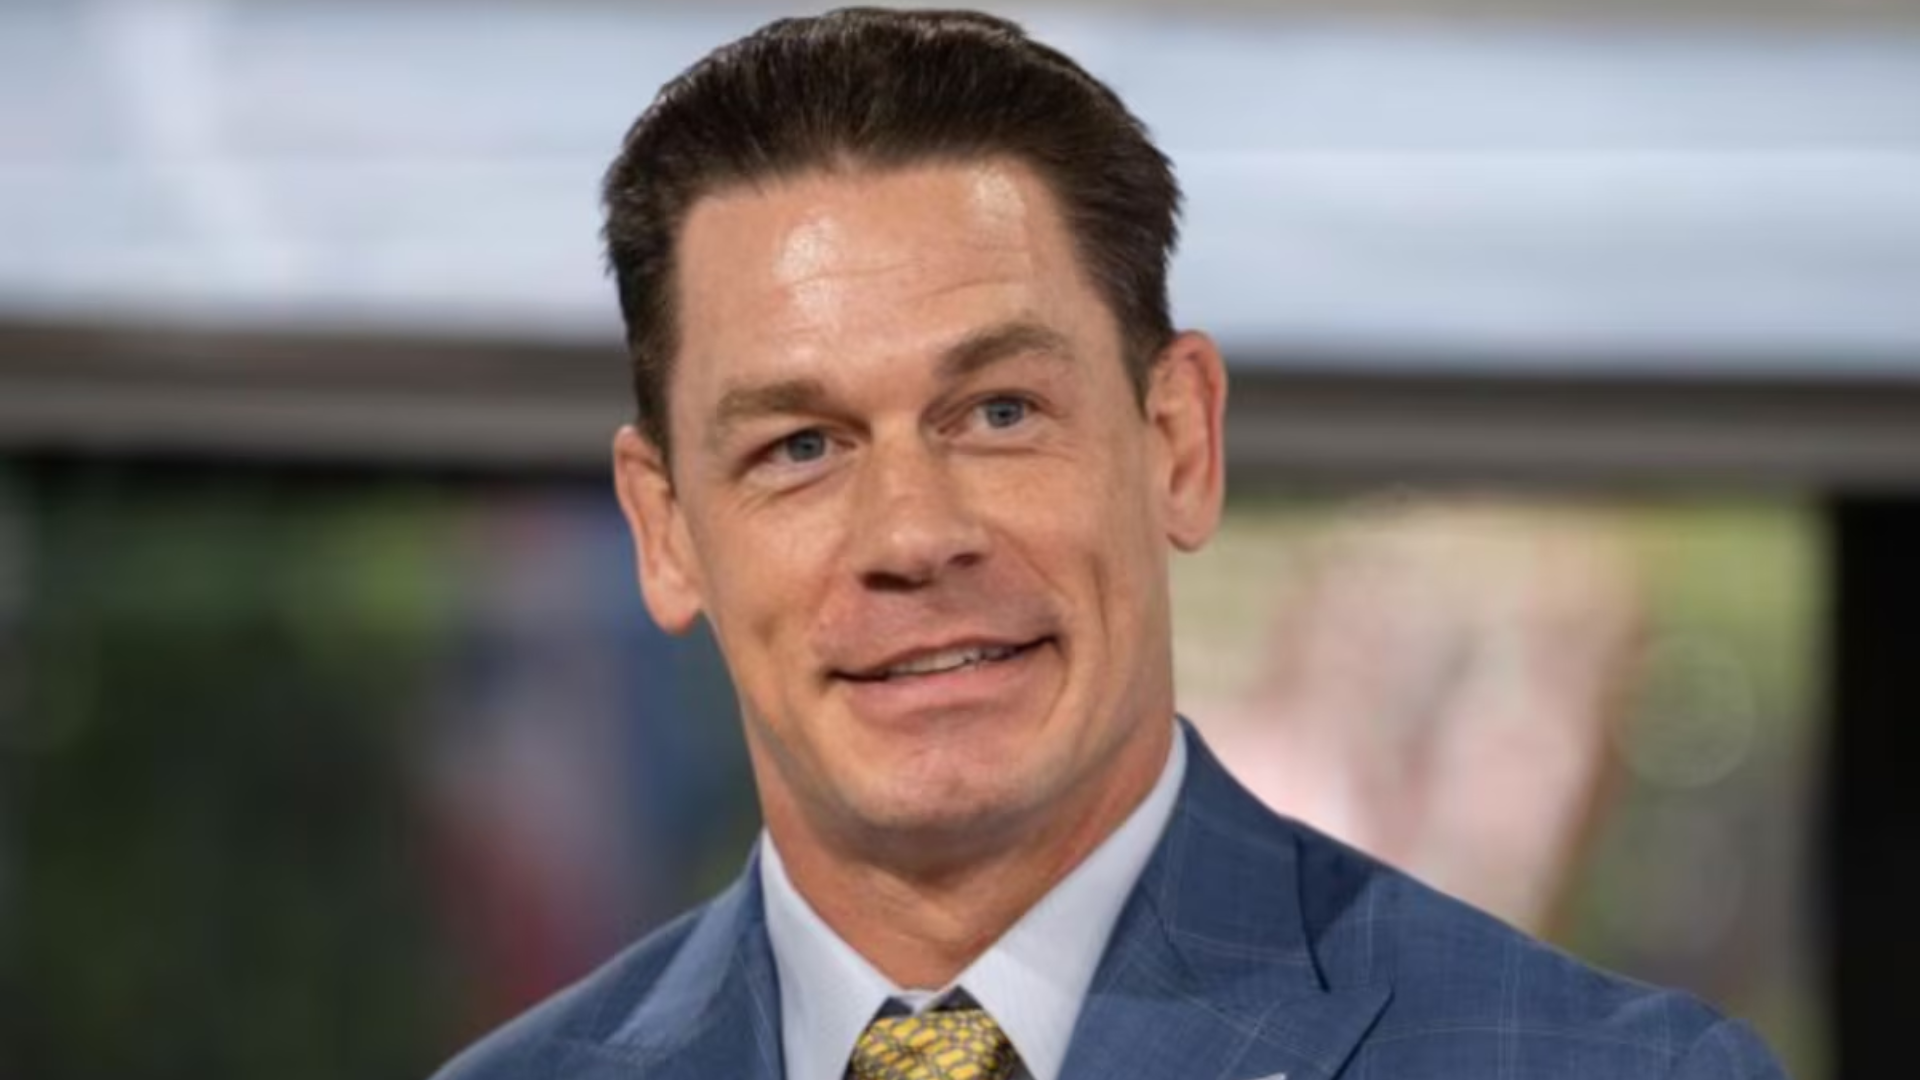 John Cena Reflects on Following His Gut in Career Choices, Defends Colleagues Amidst Award Snubs